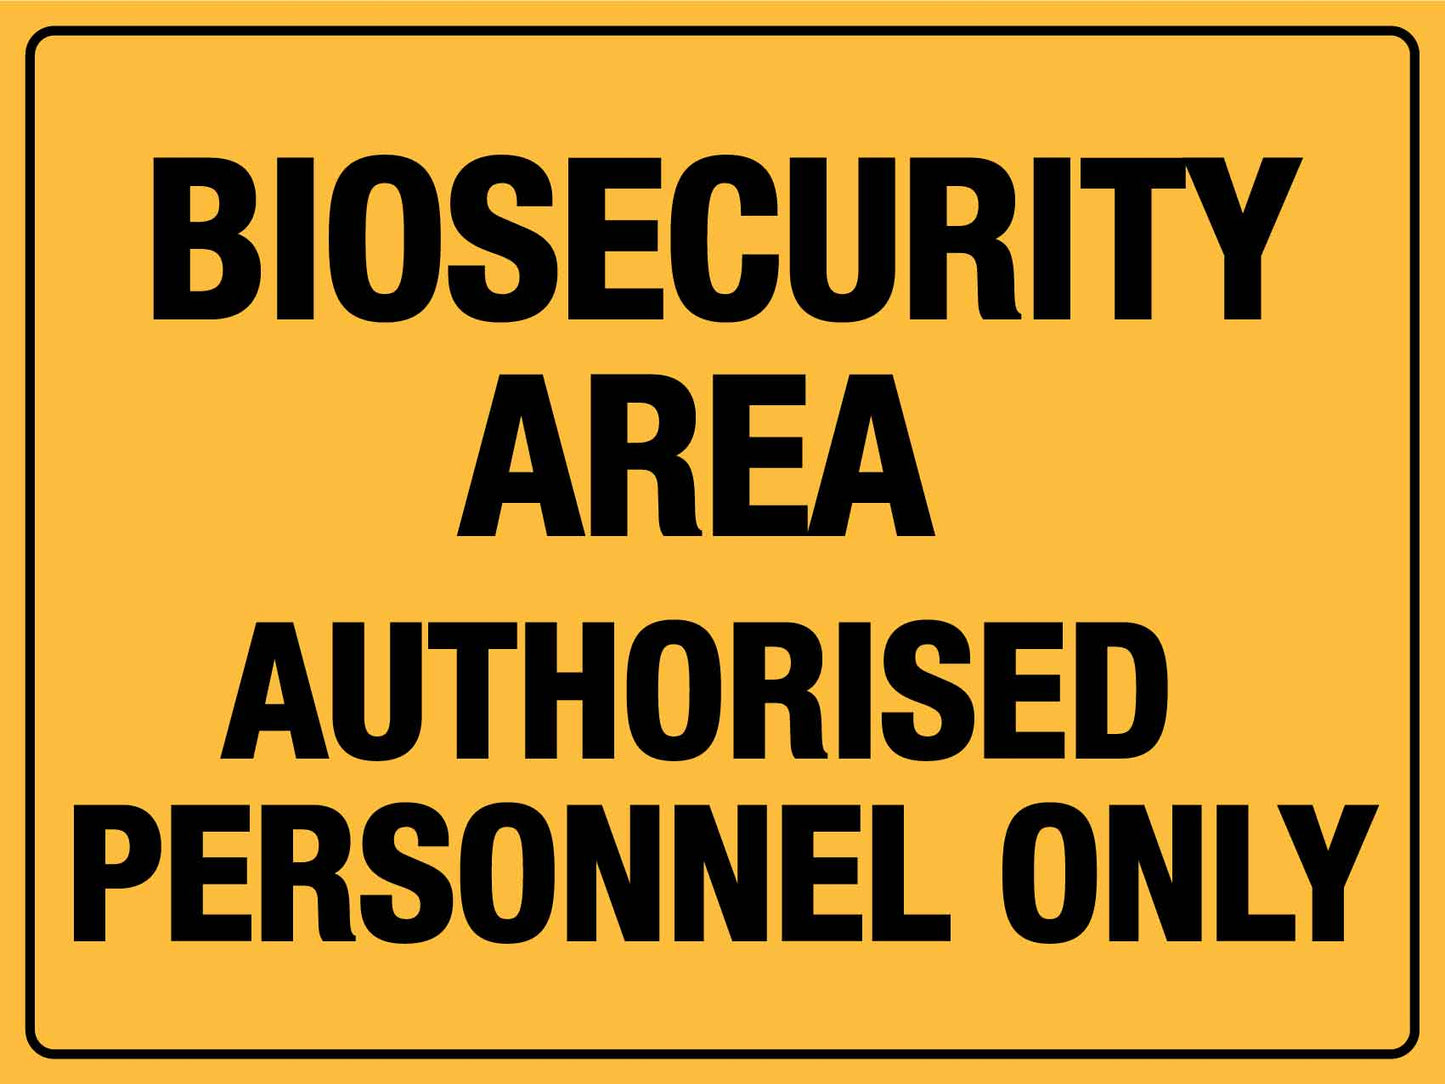 Biosecurity Area Authorised Personnel Only Sign